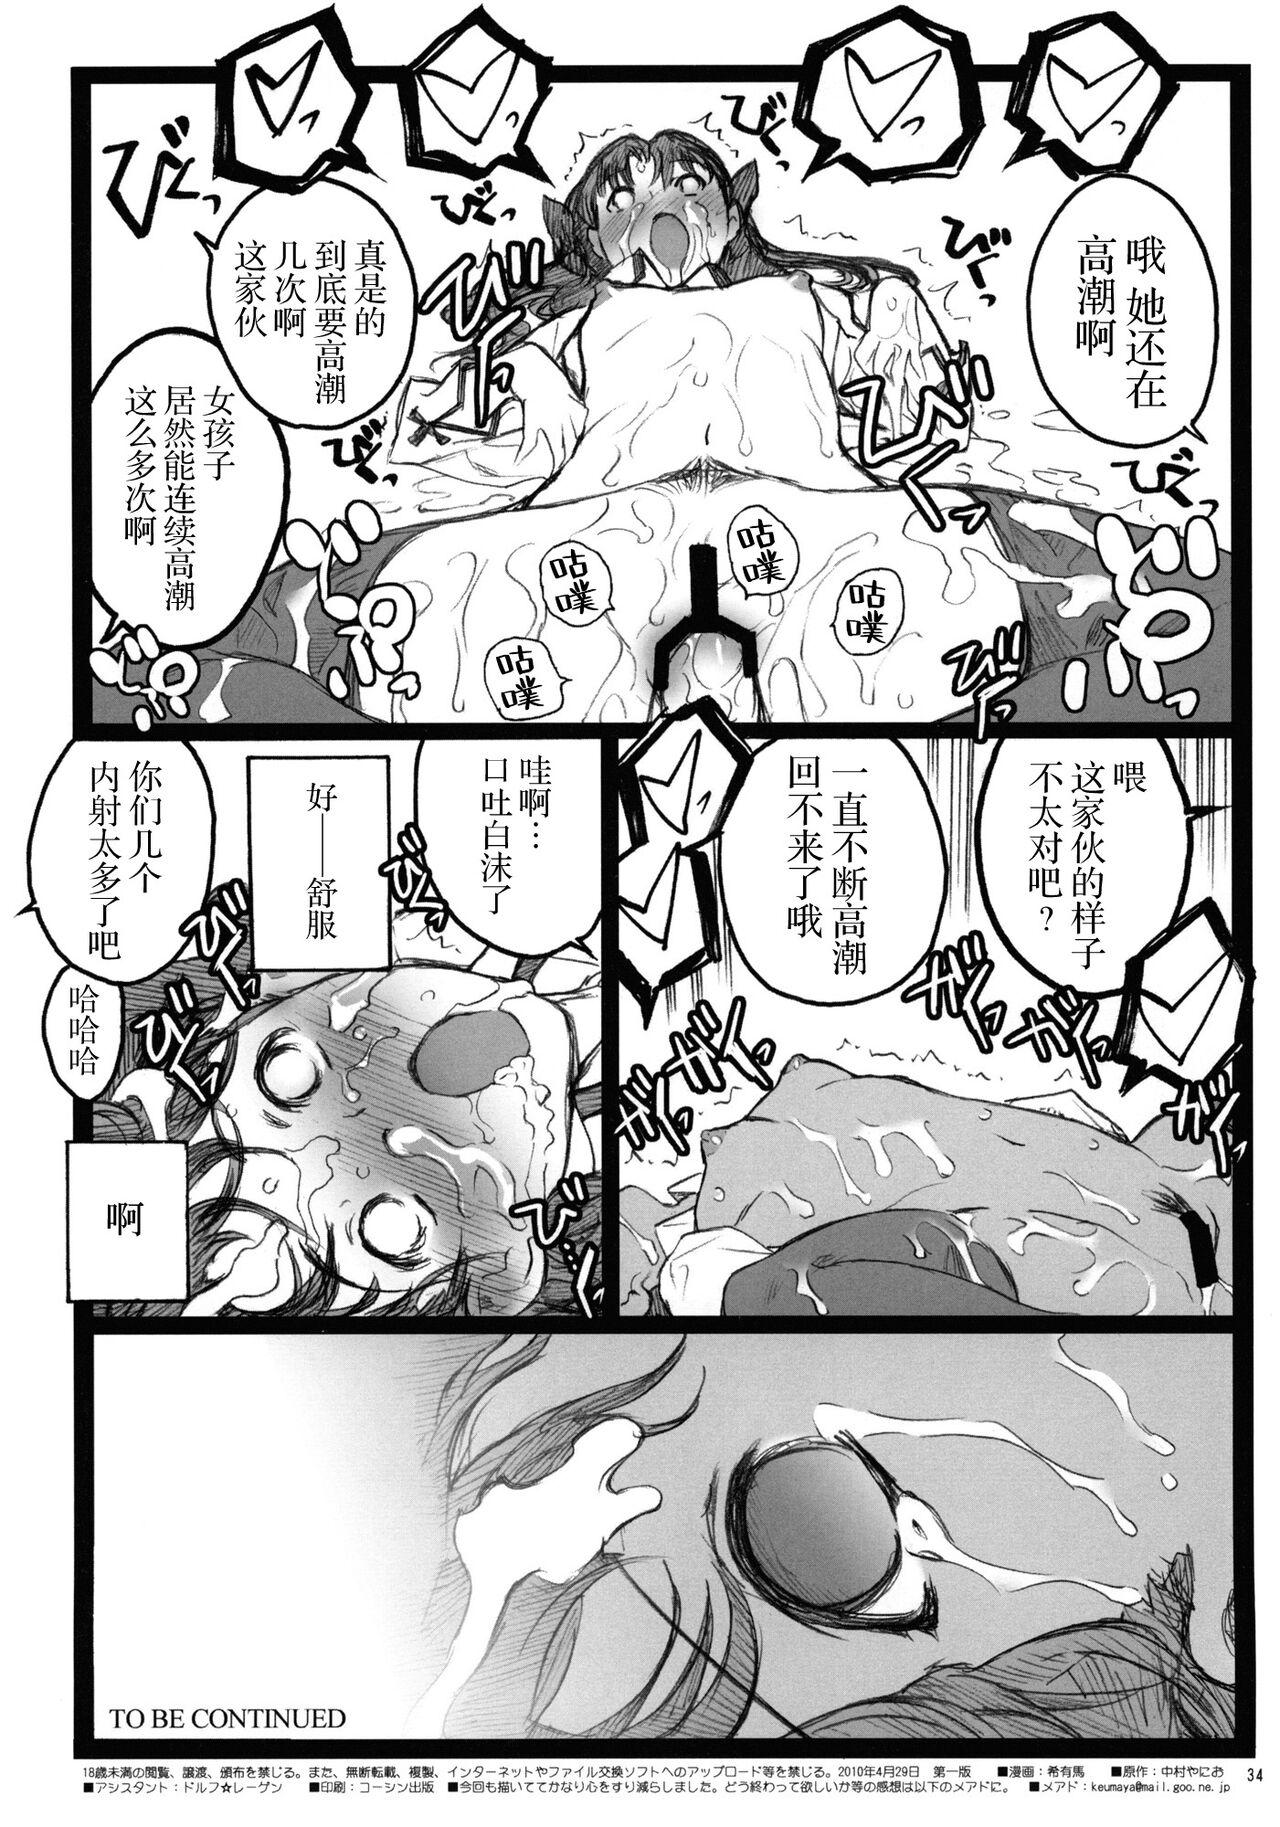 Behind Walpurgisnacht 4 - Fate stay night Raw - Page 33